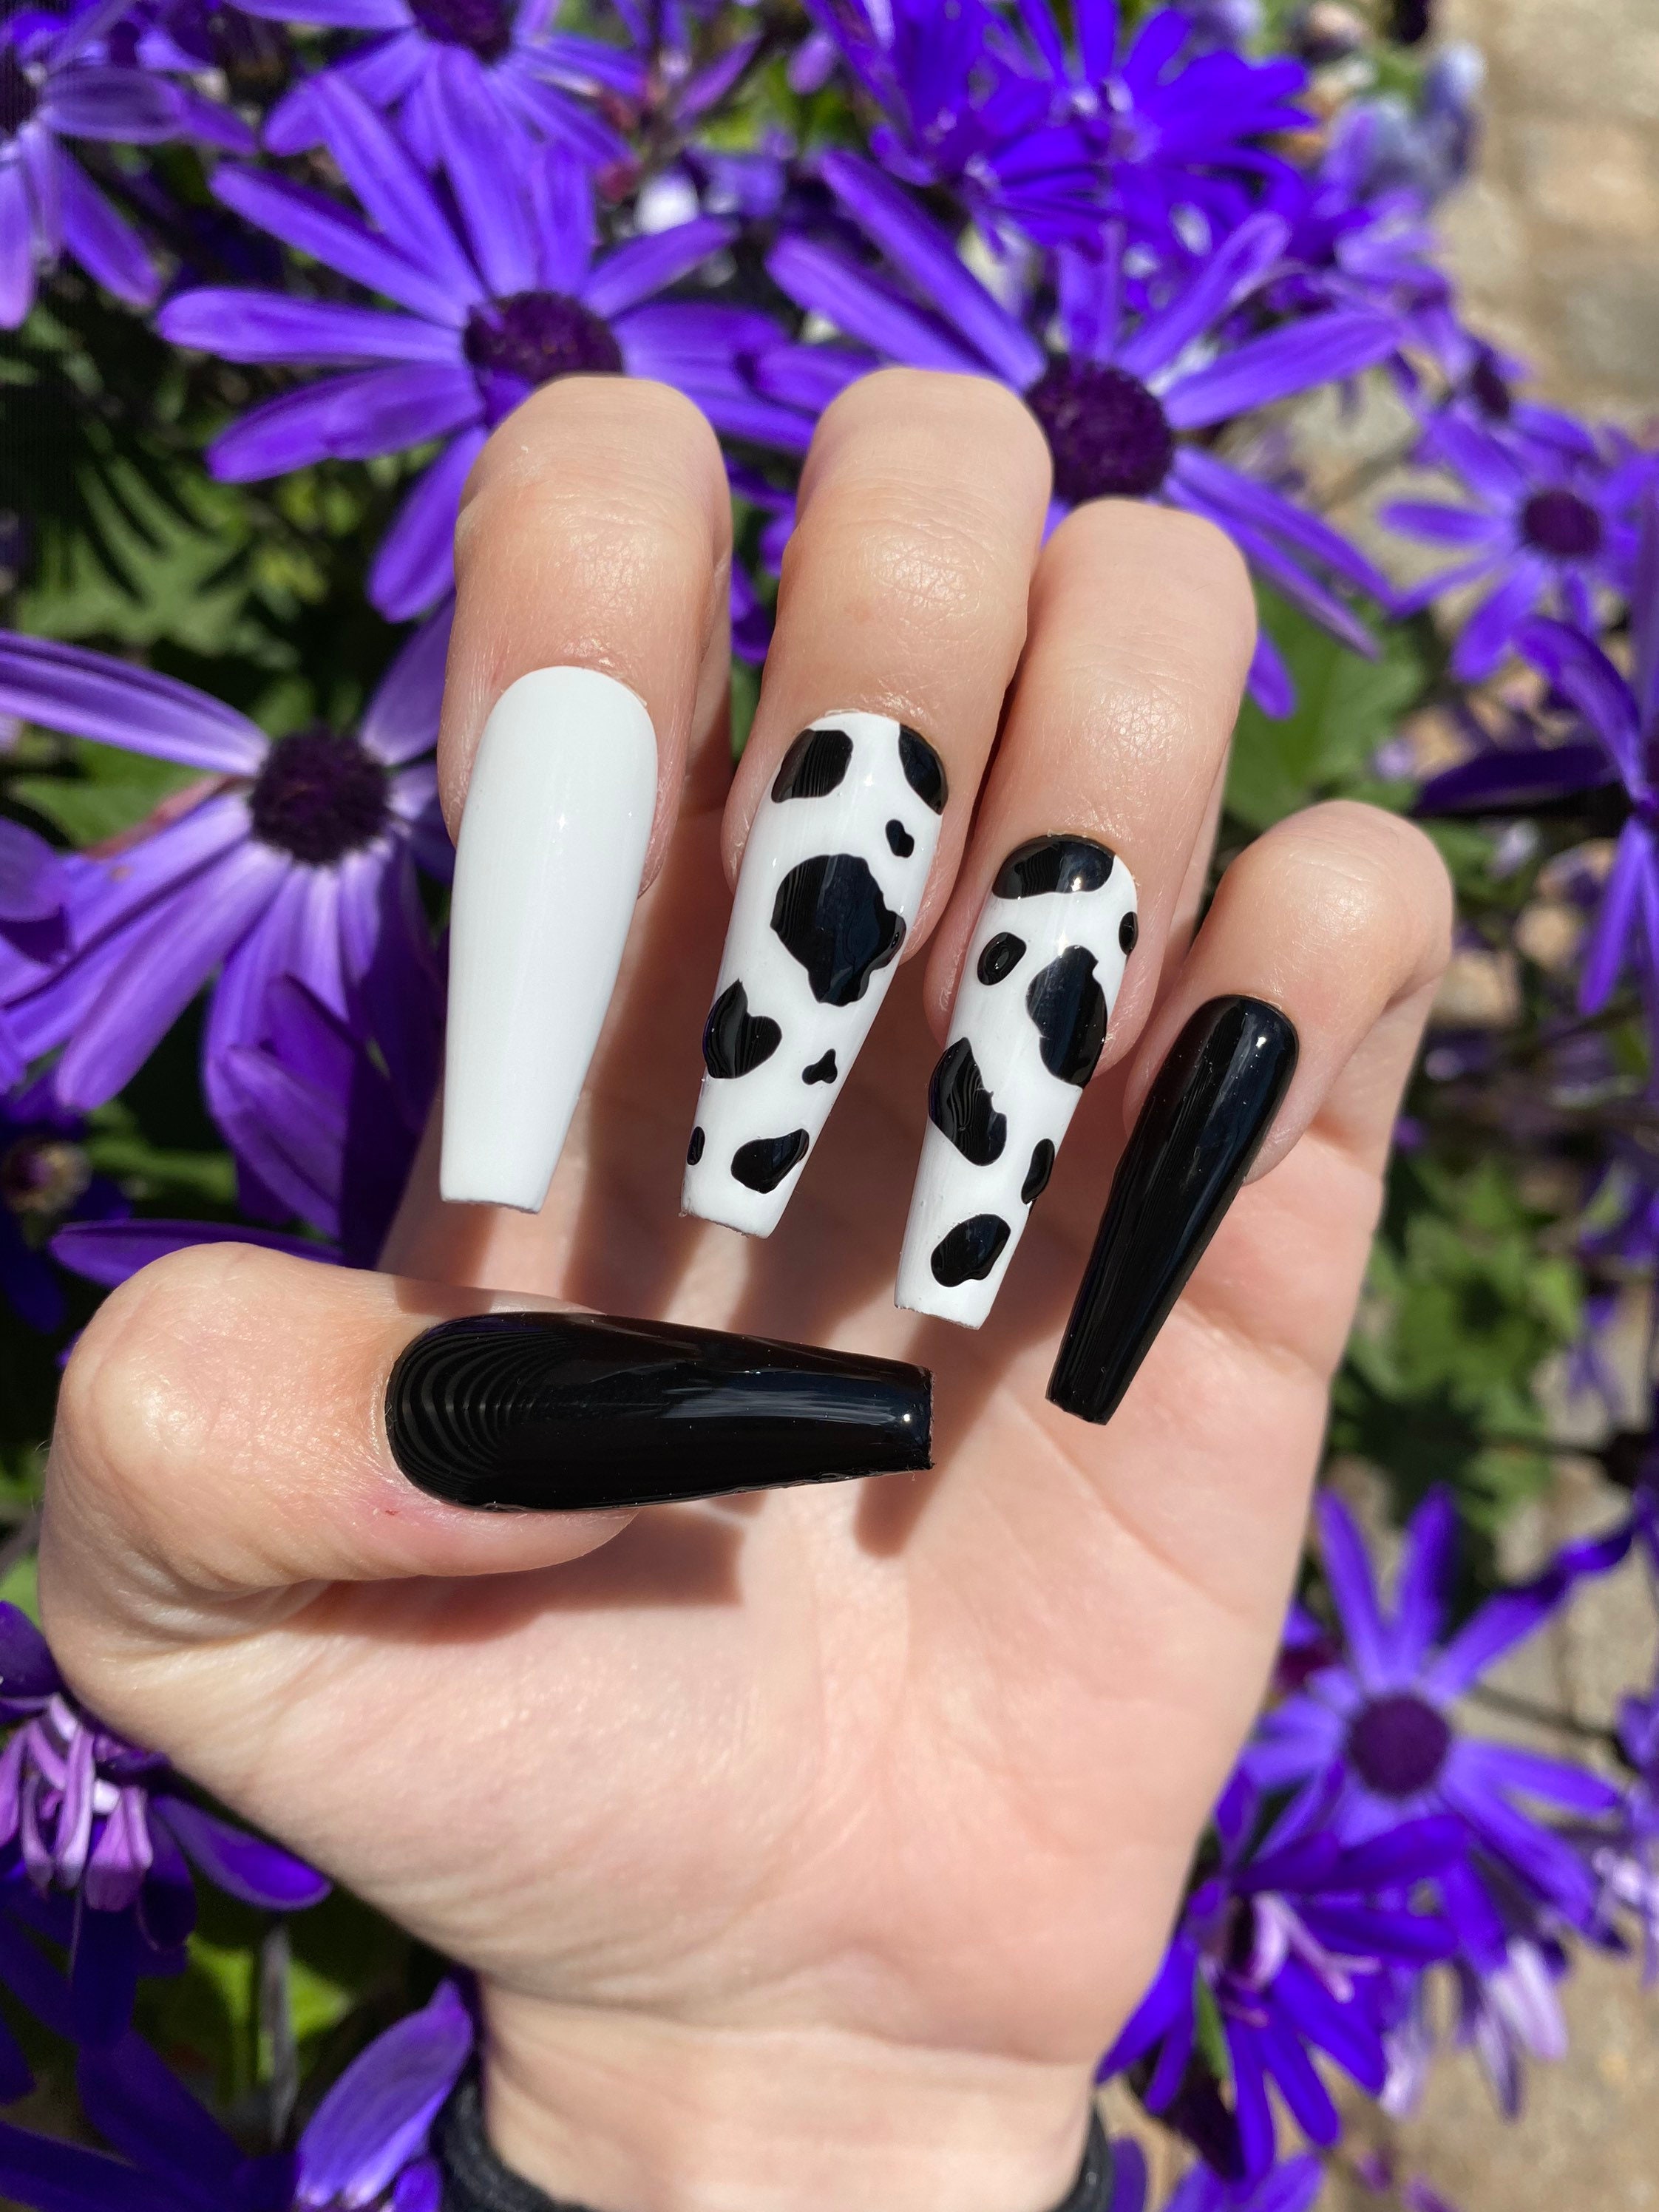 How to wear cow print nails – the latest nail trend doing the rounds